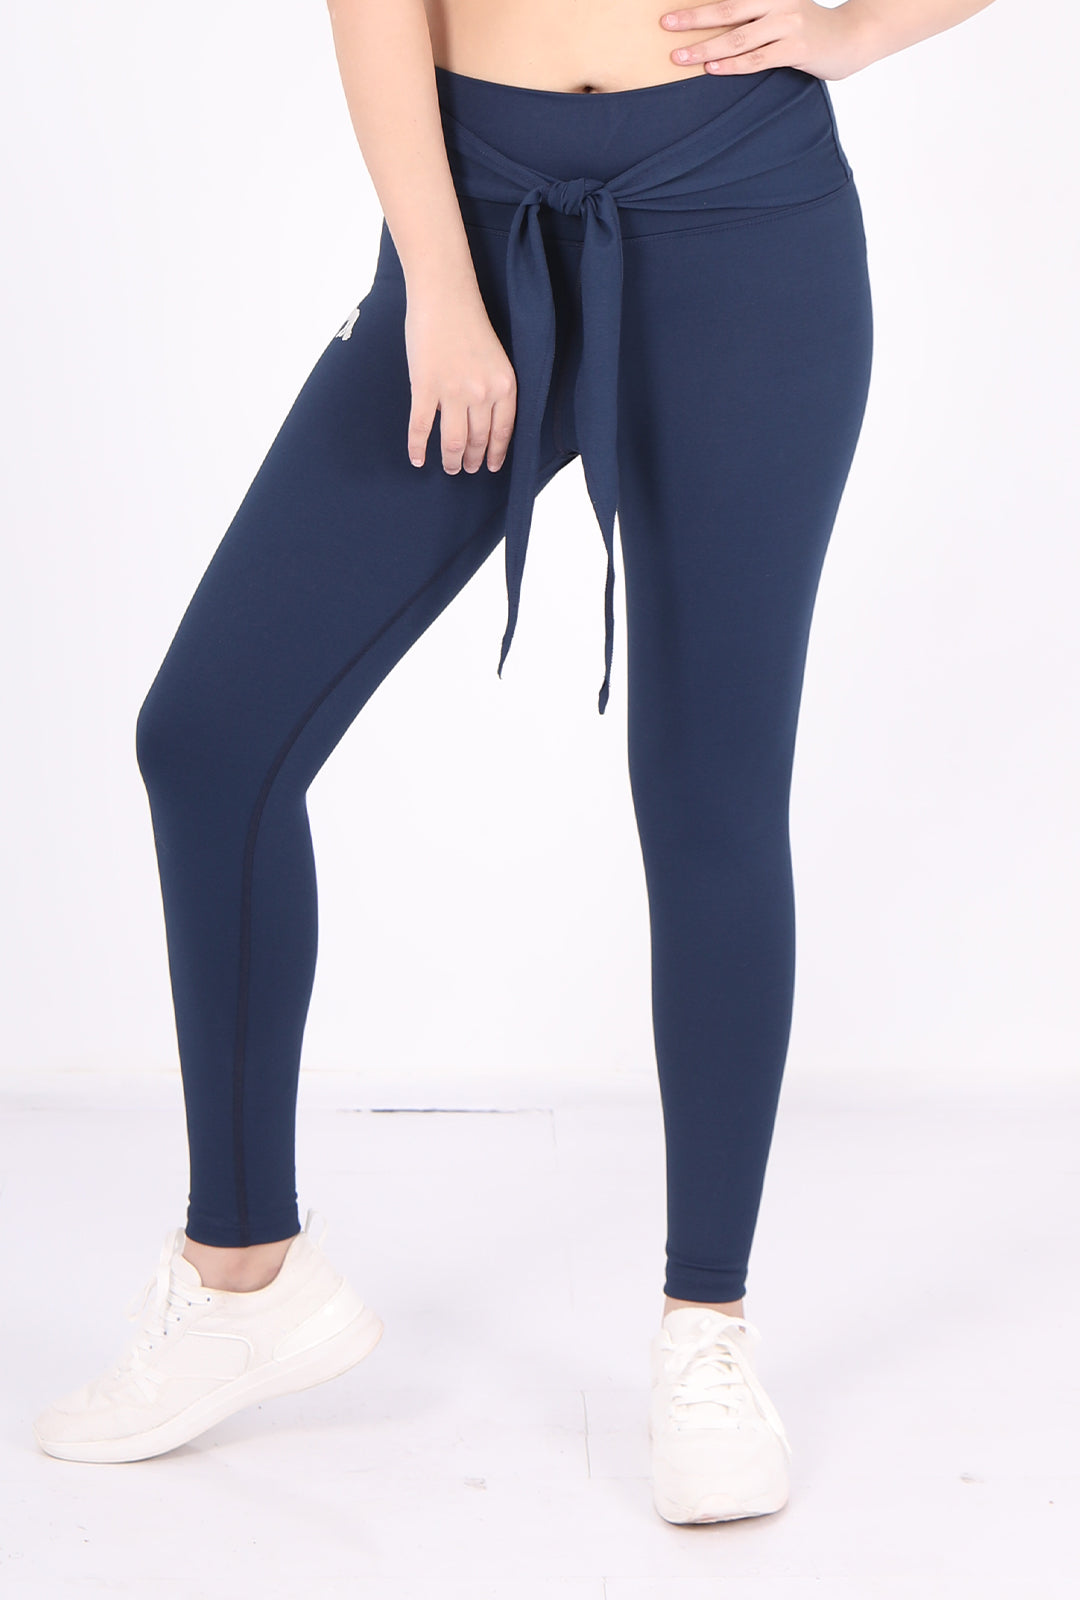 THE CRAFTED BLUE Leggings